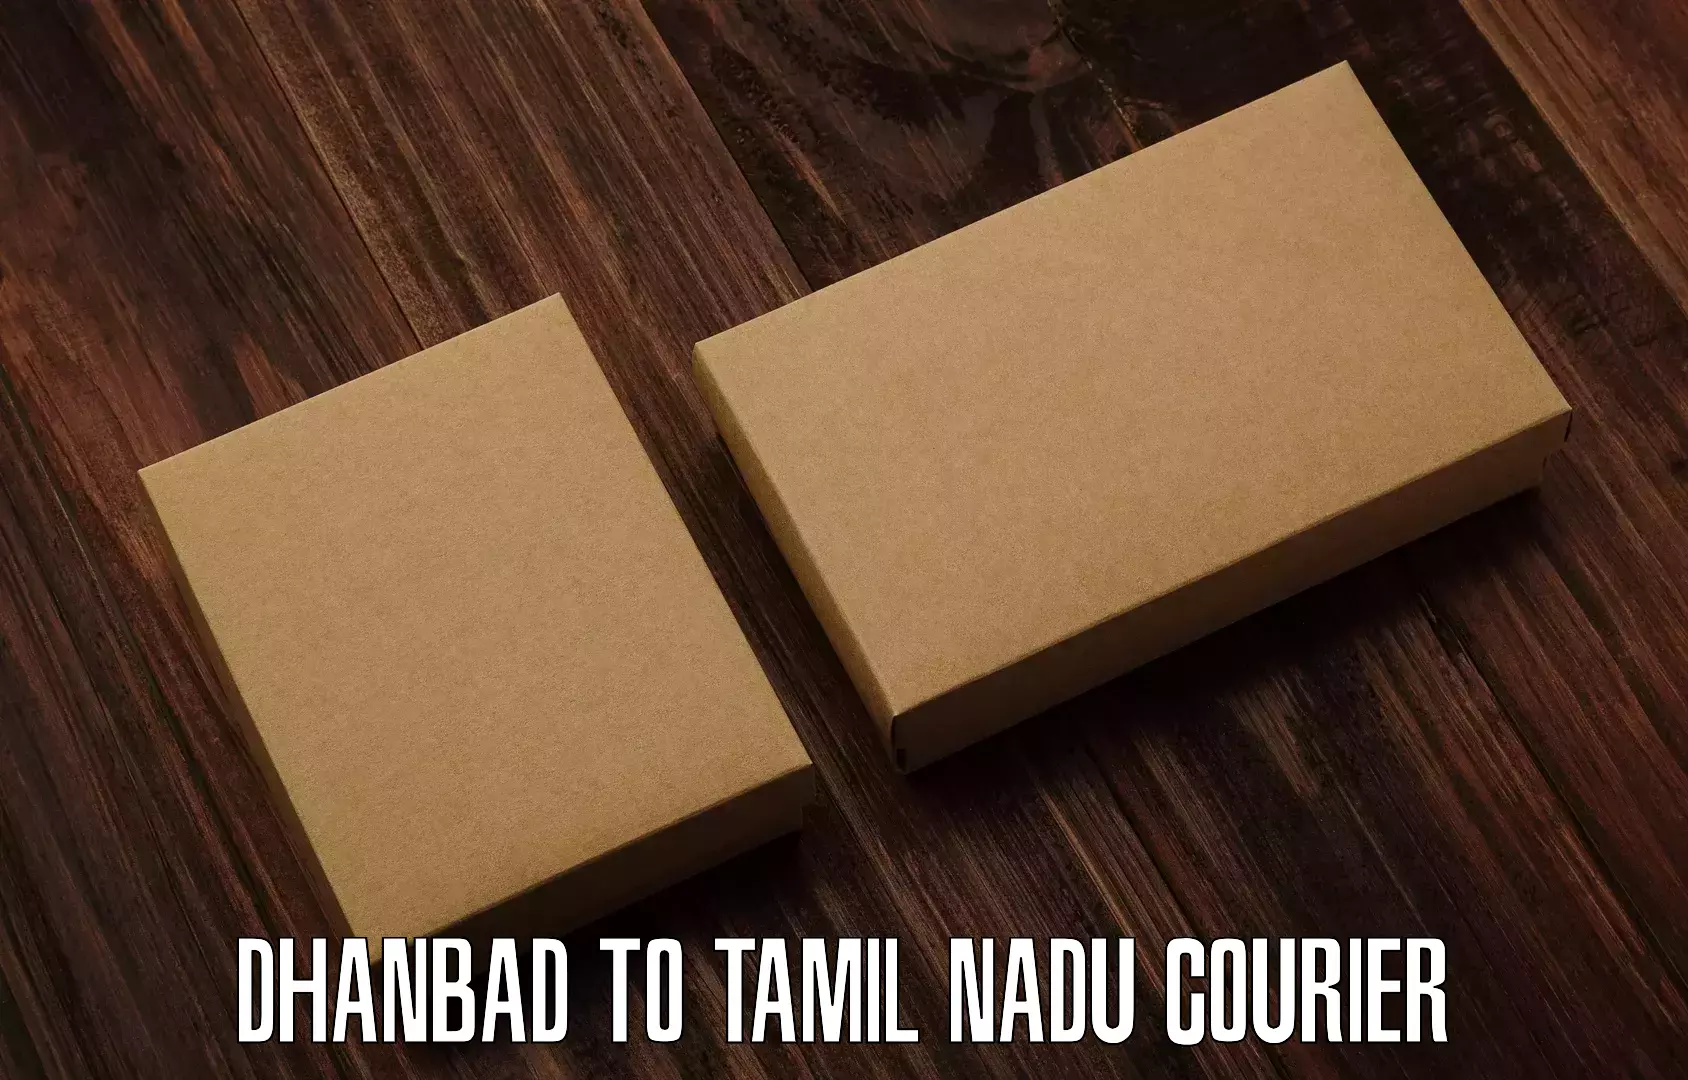 Package delivery network Dhanbad to Mettur